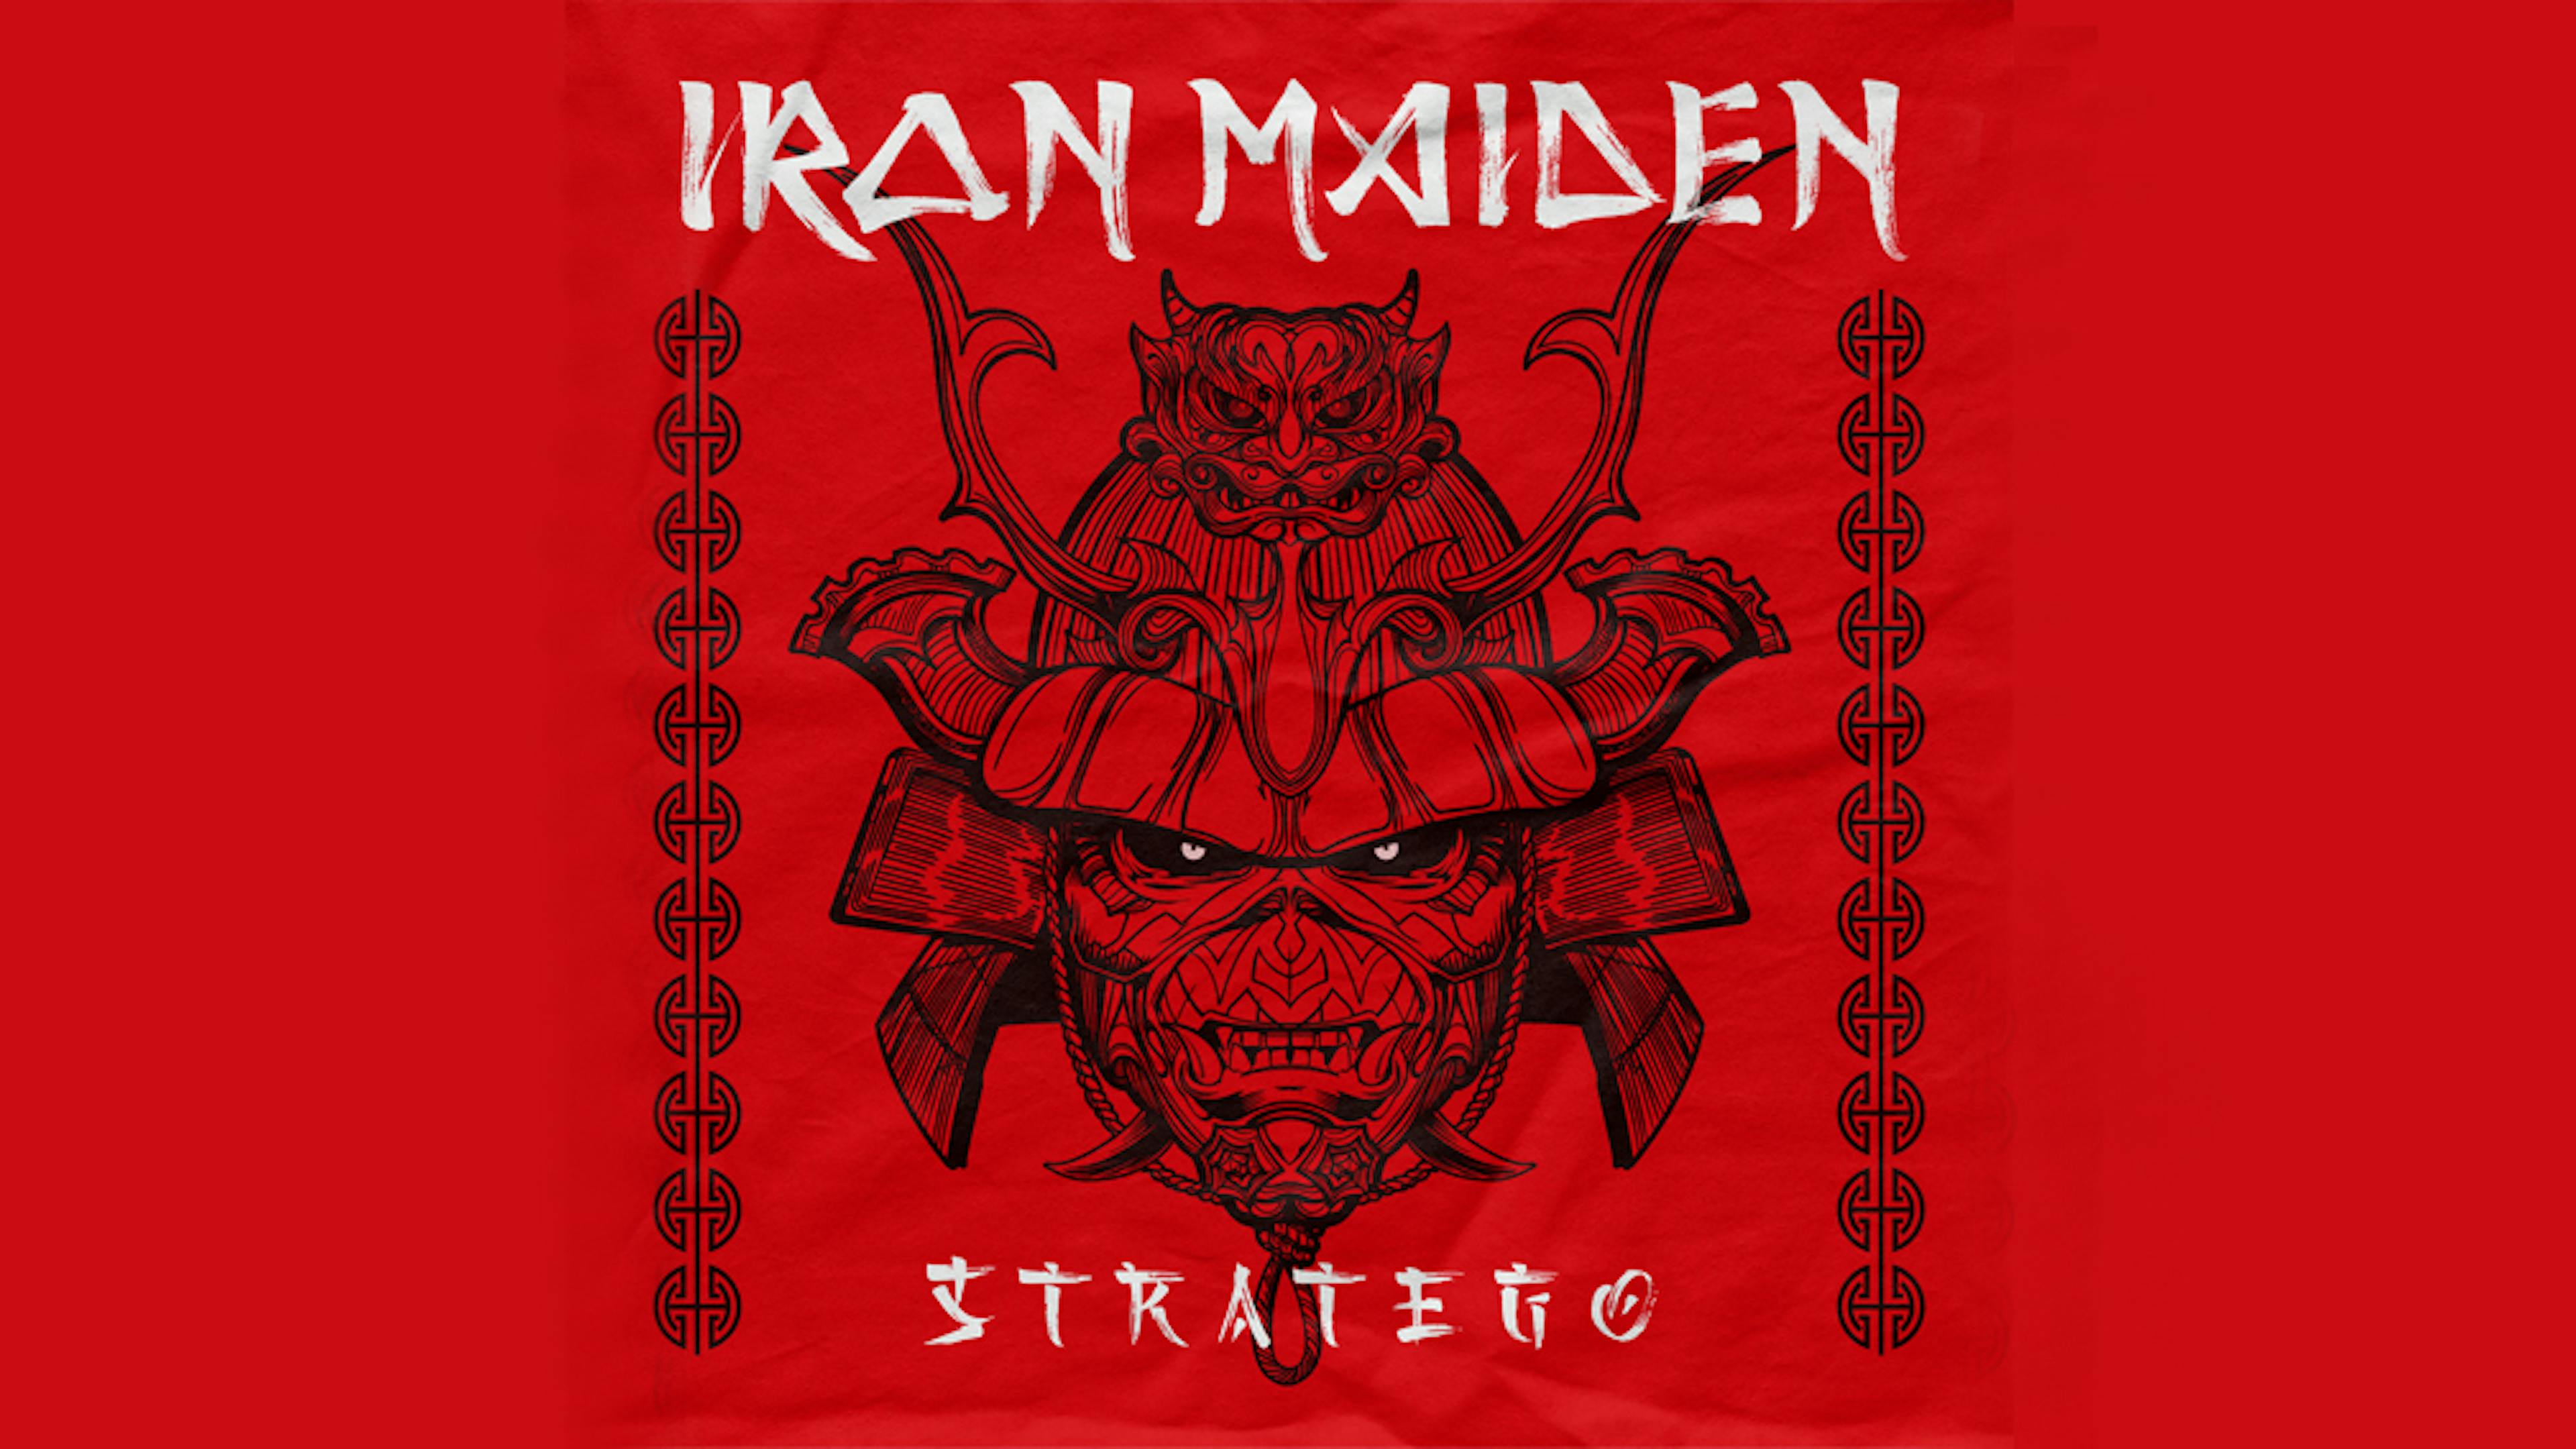 Iron Maiden are dropping a new song, Stratego, tonight